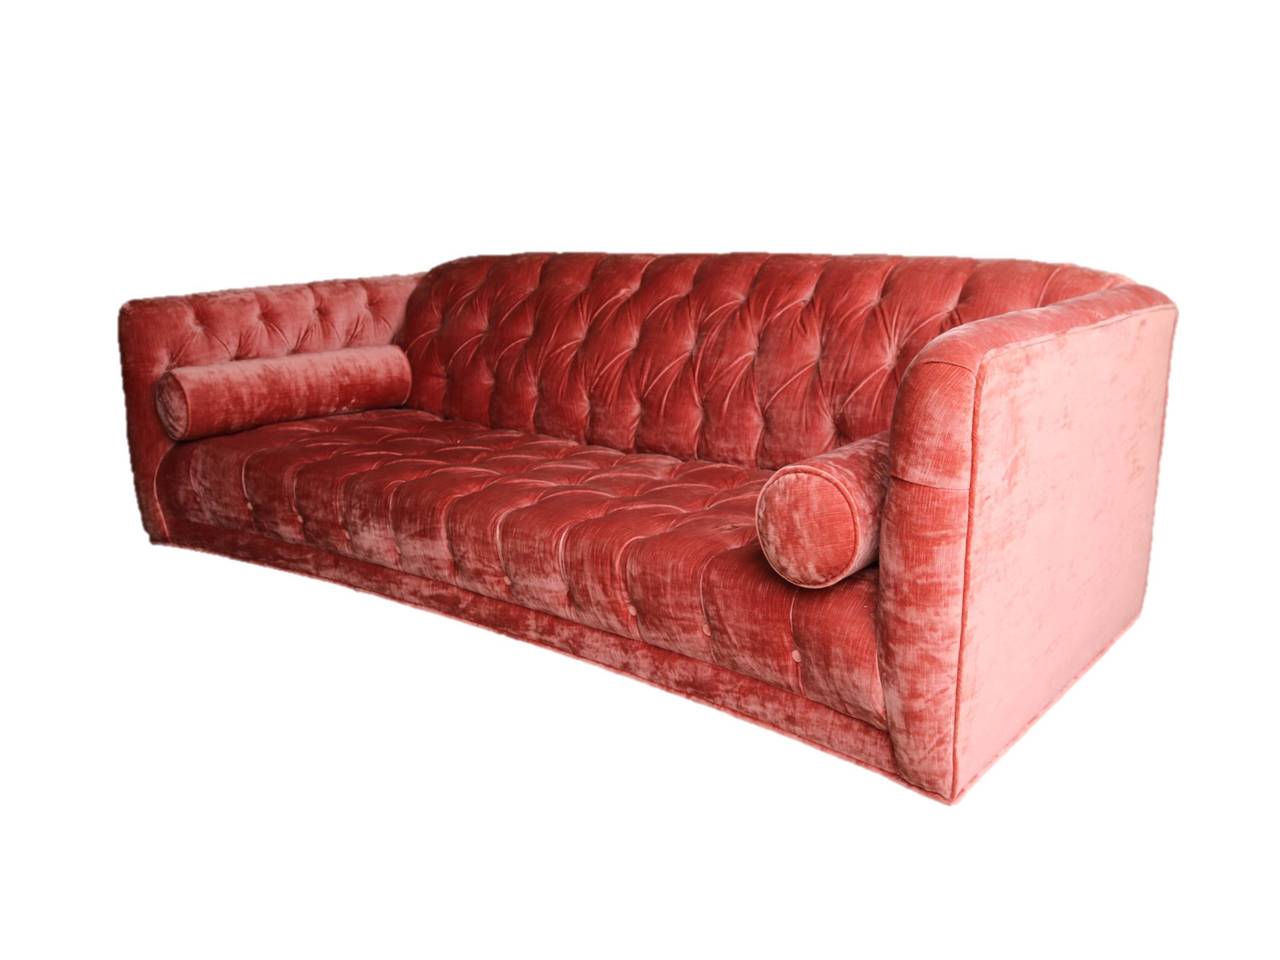 For your enjoyment - a lovely vintage Chesterfield sofa covered in its original salmon pink slub velvet.  Four dark walnut legs are set back as to be invisible to viewer.  Sofa is sturdy and sound.  Foam is soft and velvet is in very good condition,